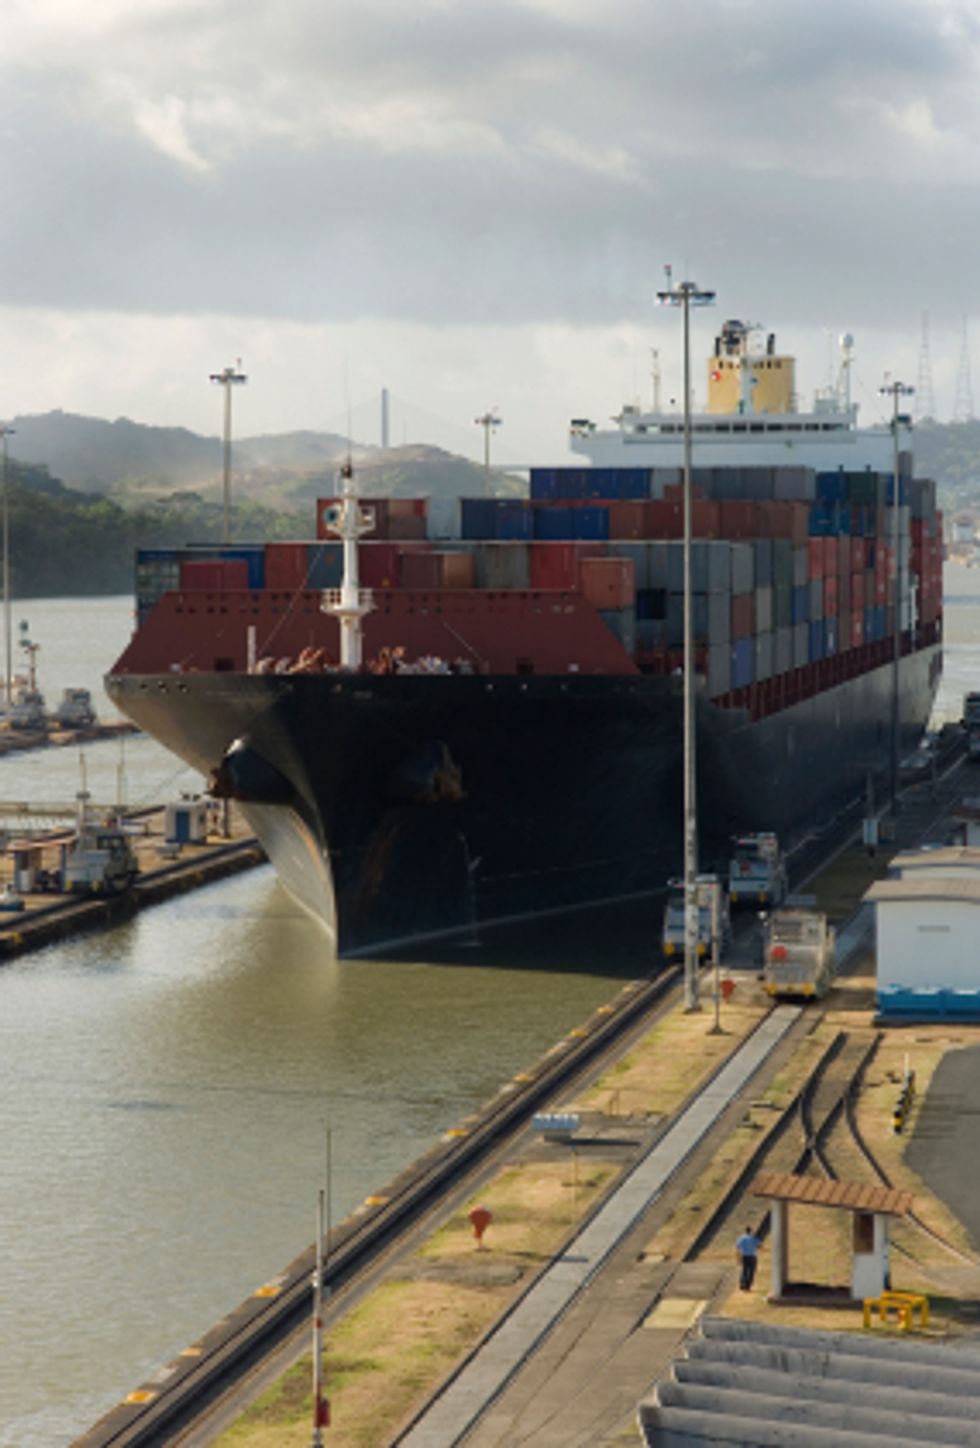 
Panama Canal Expansion Could Shift Freight Movement
